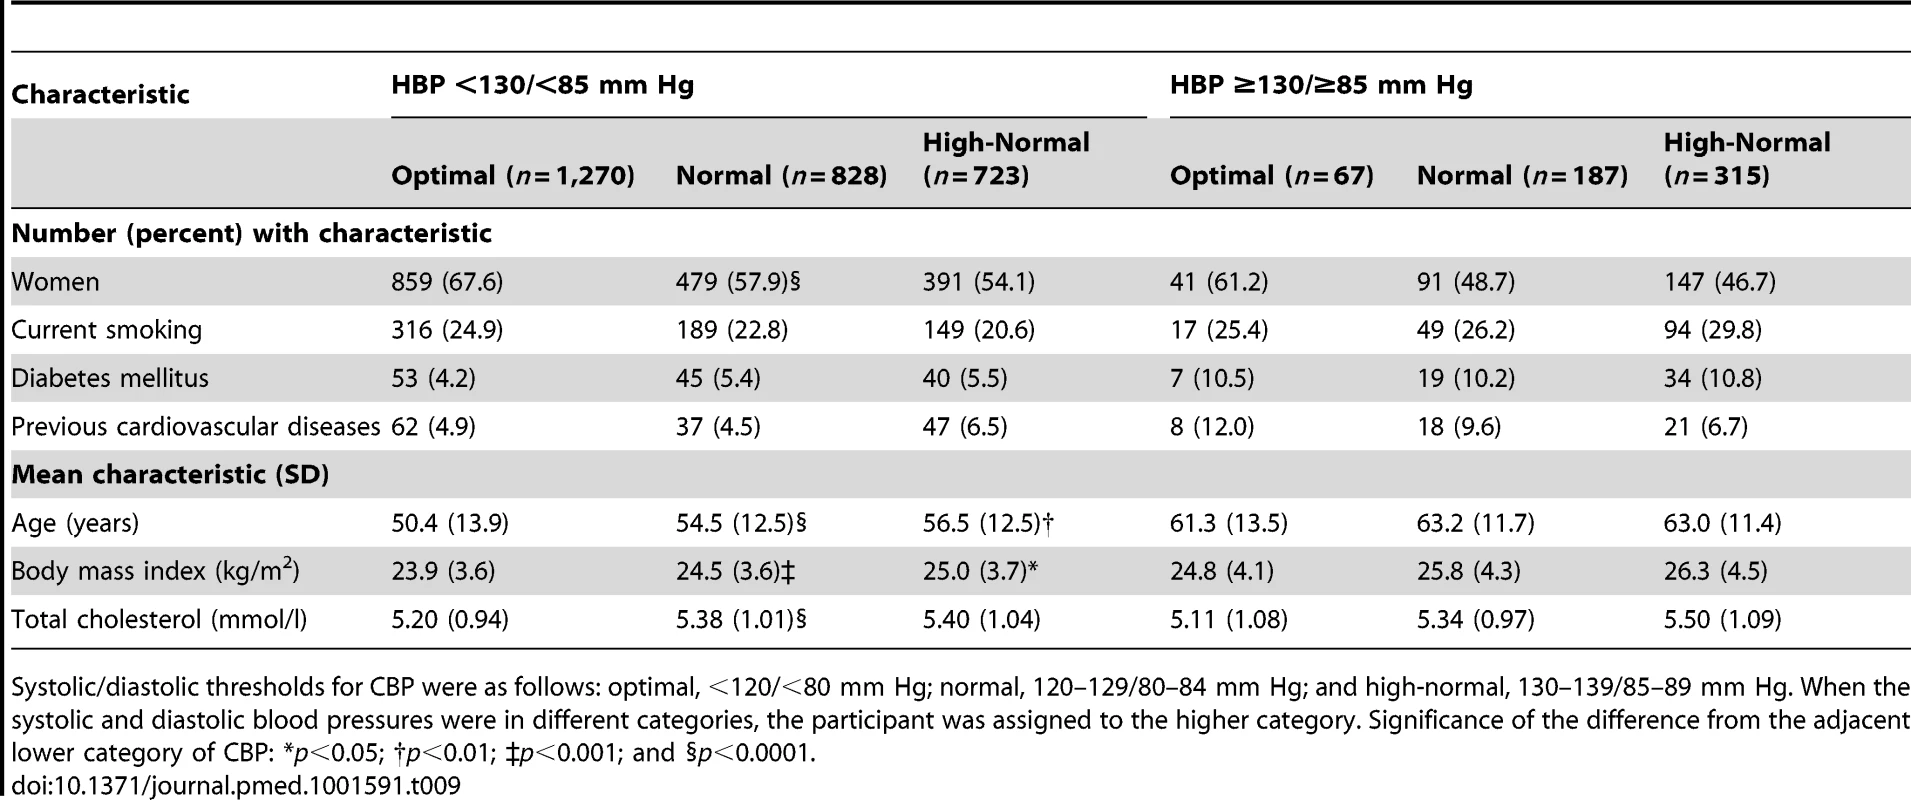 Characteristics of participants with masked hypertension (home blood pressure ≥130/≥85 mm Hg) compared with participants with true optimal, normal, or high-normal blood pressure (home blood pressure &lt;130/&lt;85 mm Hg).